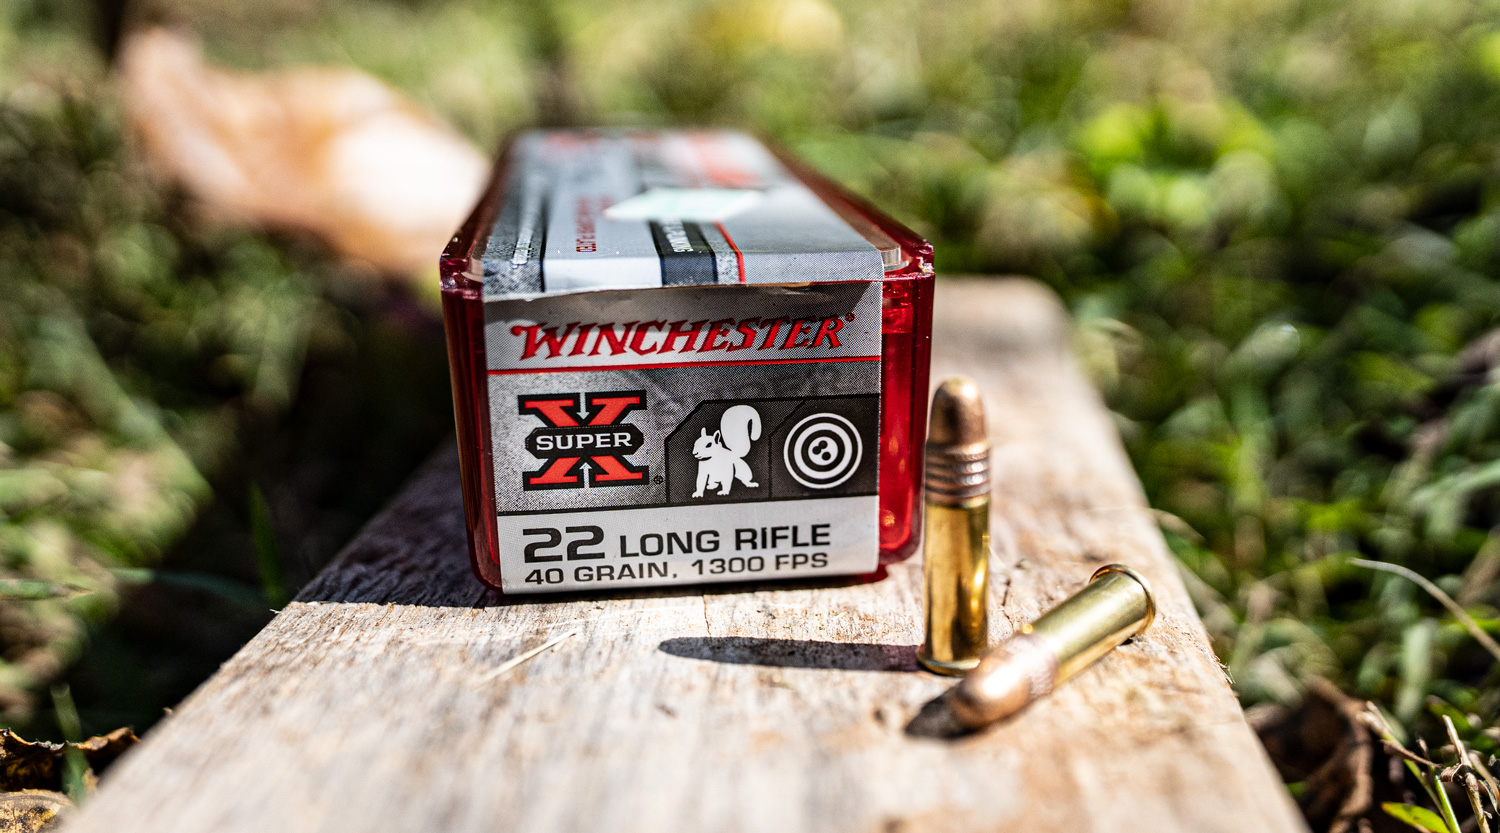 Winchester Super-X 22 LR ammo for hunting